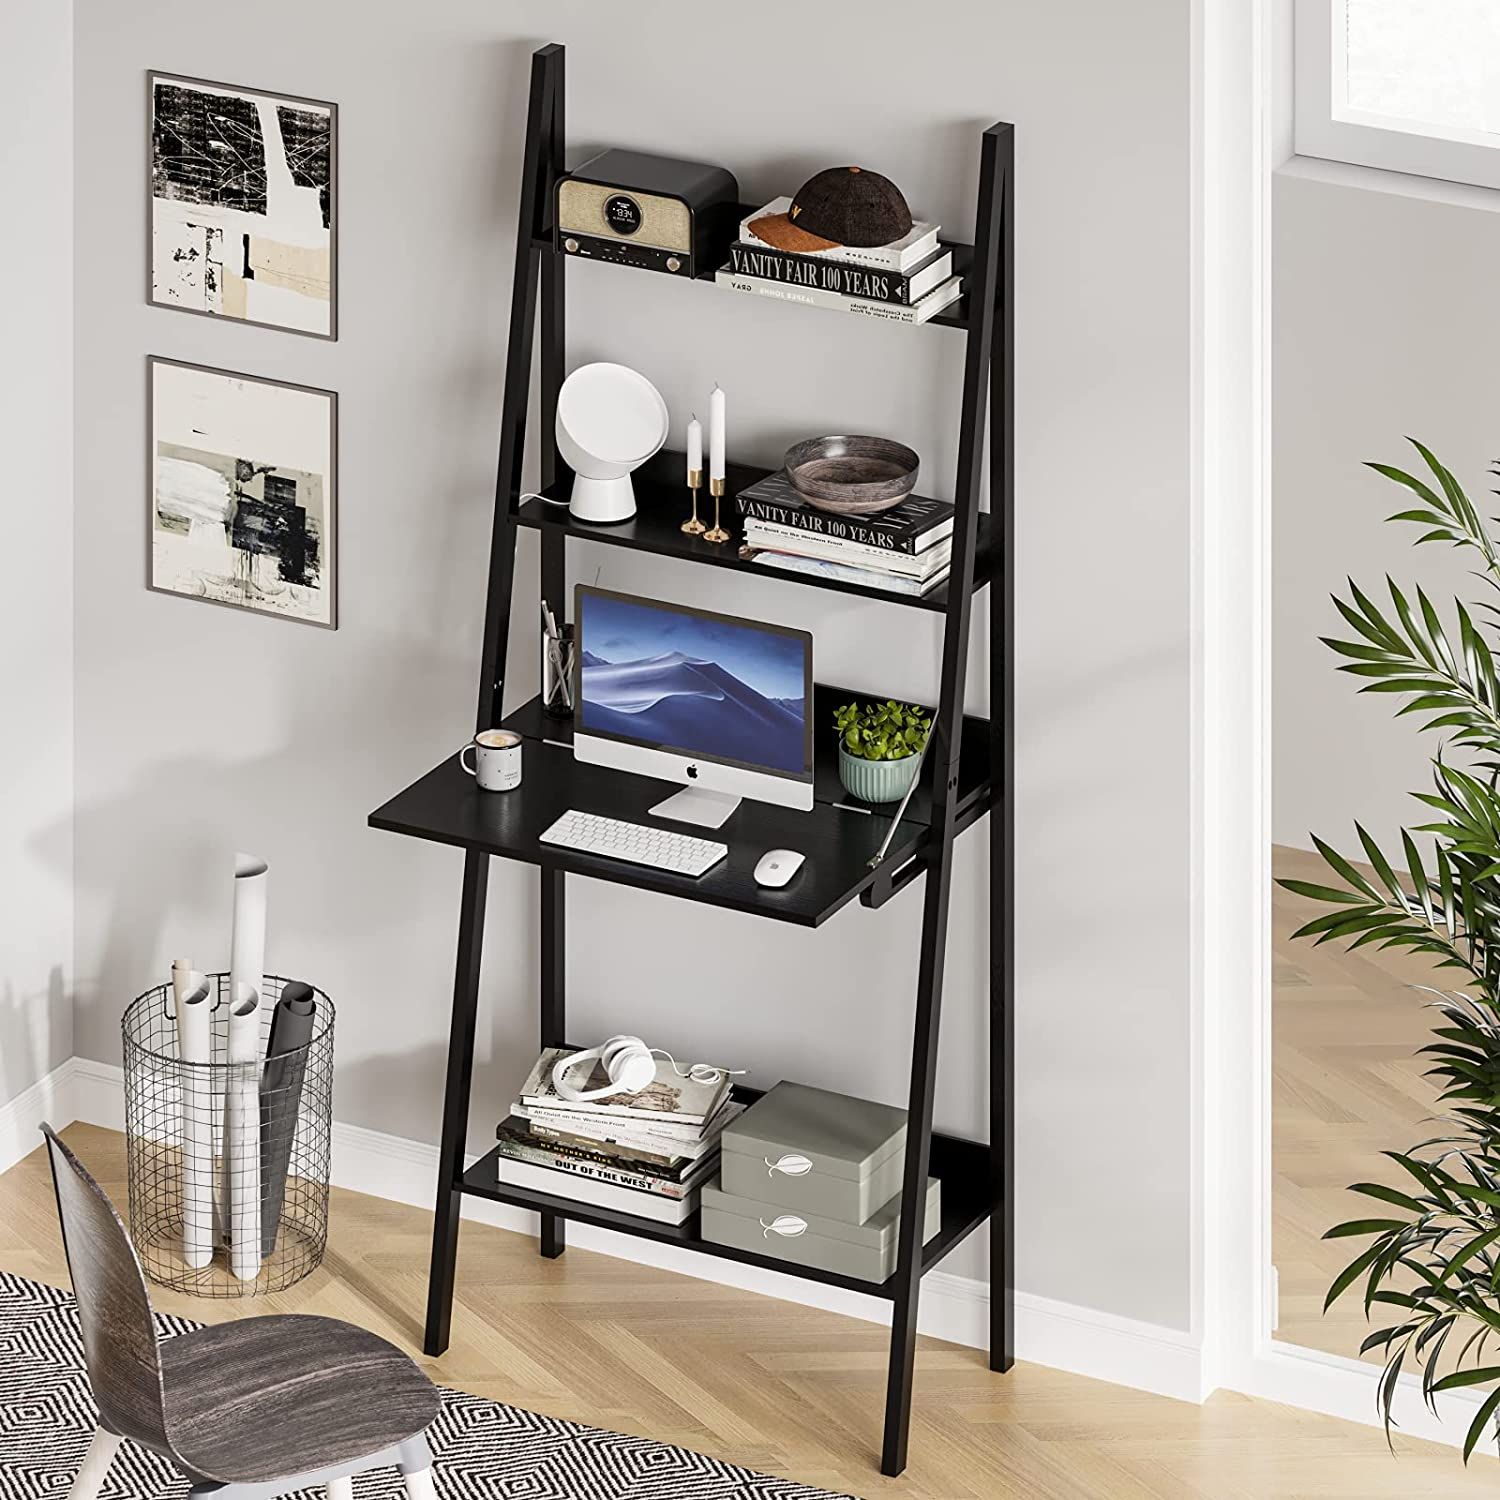 4 Tiers Ladder Shelf Bookcase With Drop Down Desk Storage Stand For Pertaining To 2 Shelf Black Ladder Desks (View 4 of 15)